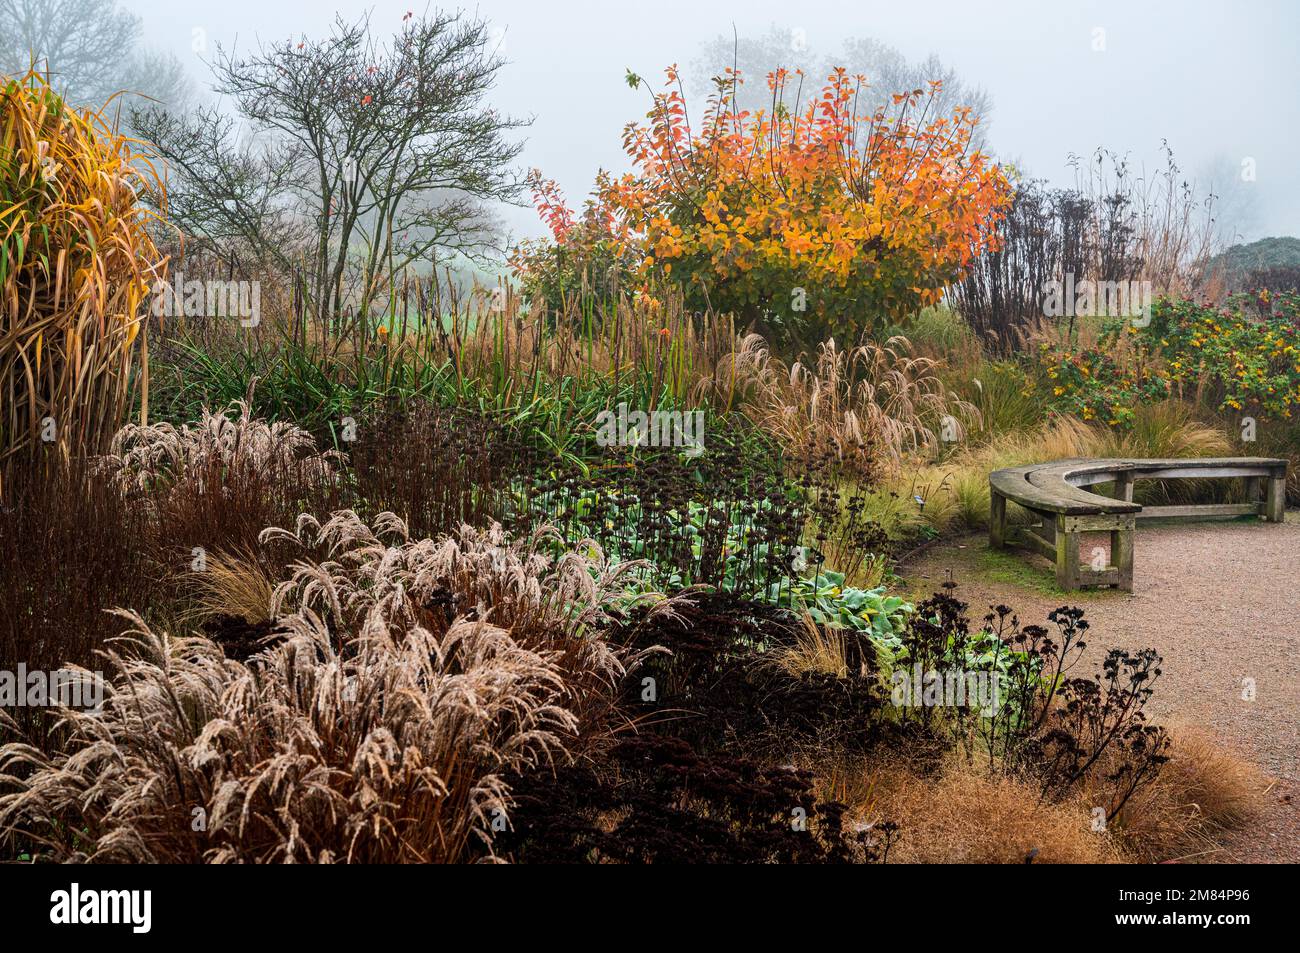 RHS Hyde Hall, Royal Horticultural Society, Clover Hill on a foggy autumn day. Stock Photo